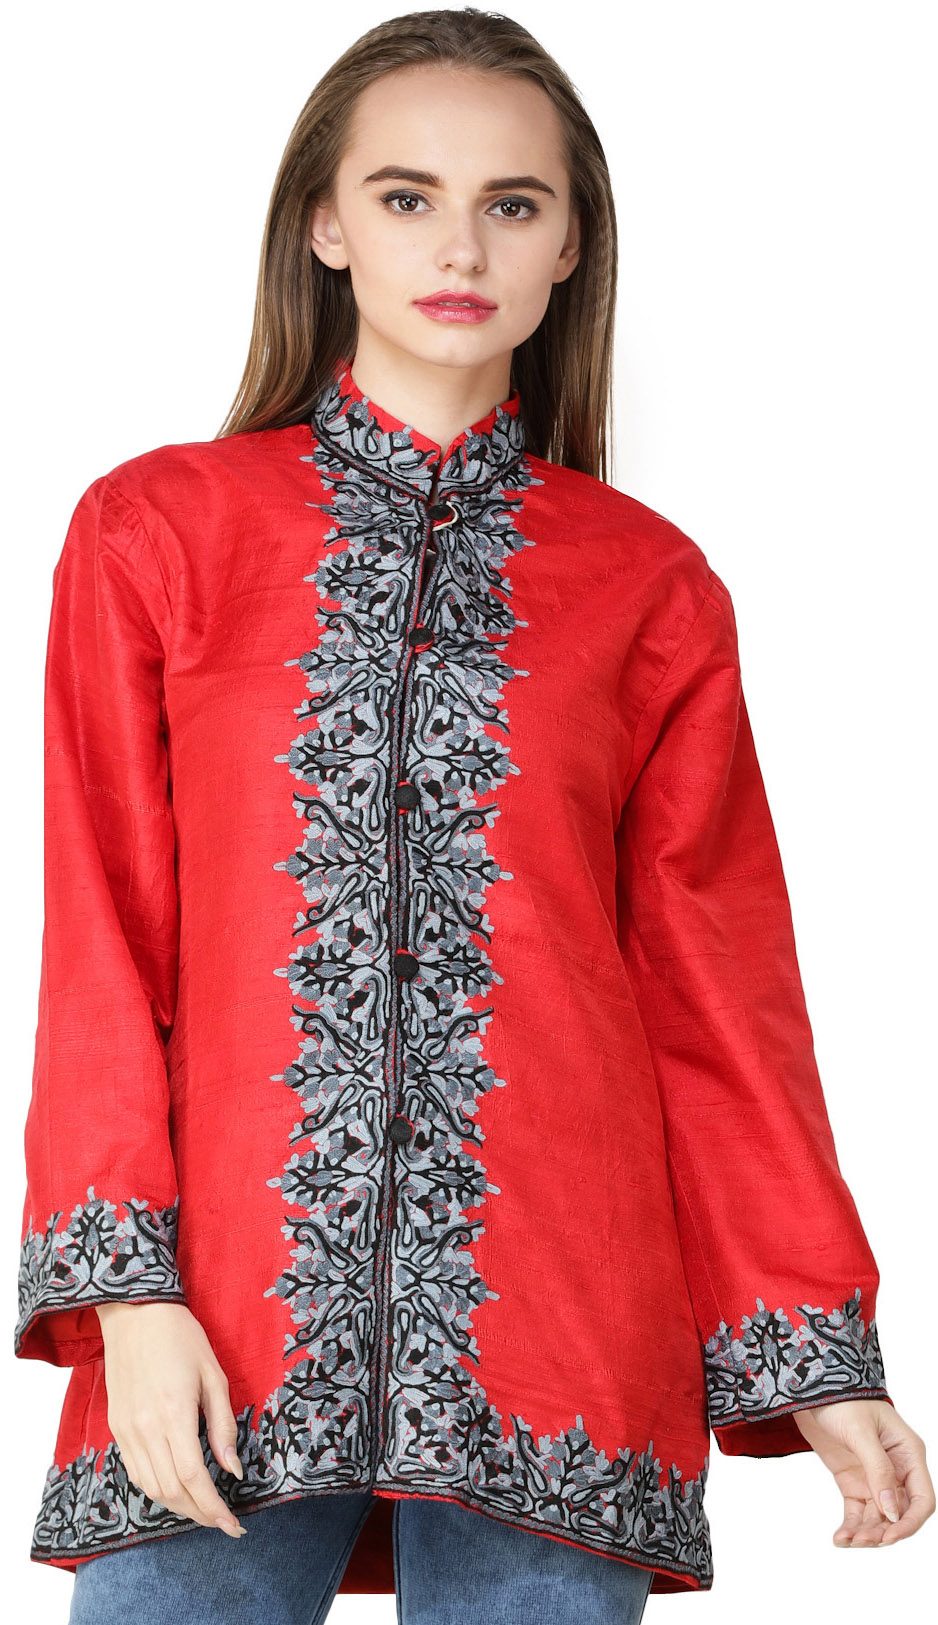 Bittersweet-red Jacket from Kashmir with Flowers Embroidered on Neck ...